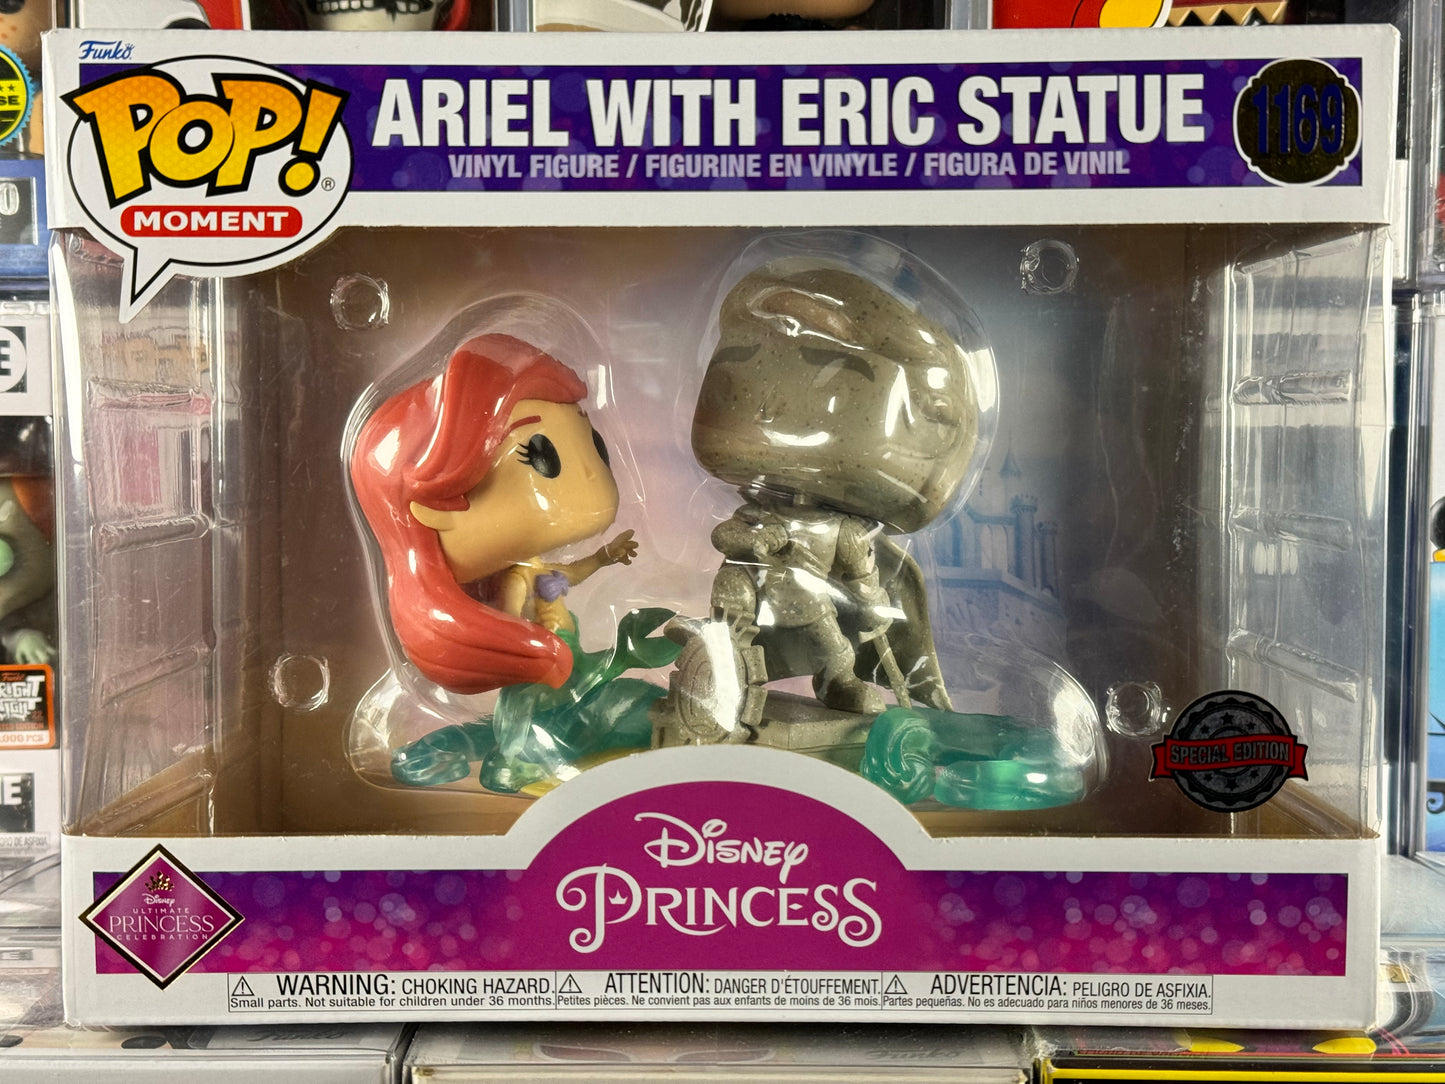 Disney Princess - Moment - The Little Mermaid - Ariel With Eric Statue (1169)